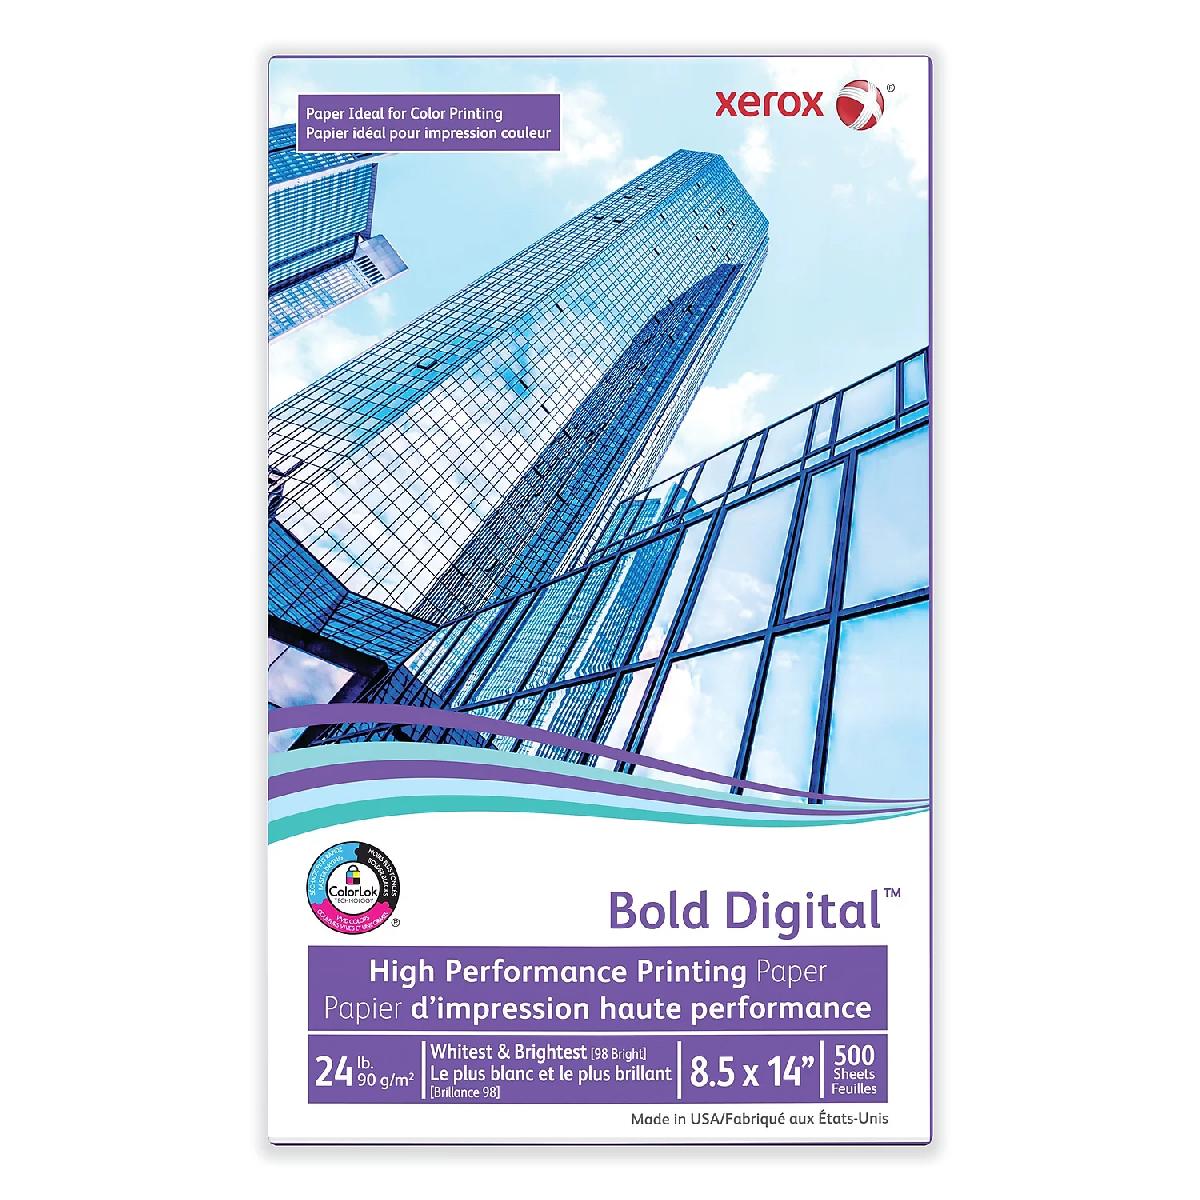 Xerox® Bold Digital™ Printing Paper Bright White 24 lb. Smooth Text 90 gsm 98 Bright 8.5x14 in. 500 Sheets per Ream - Email or call for Bulk Orders!